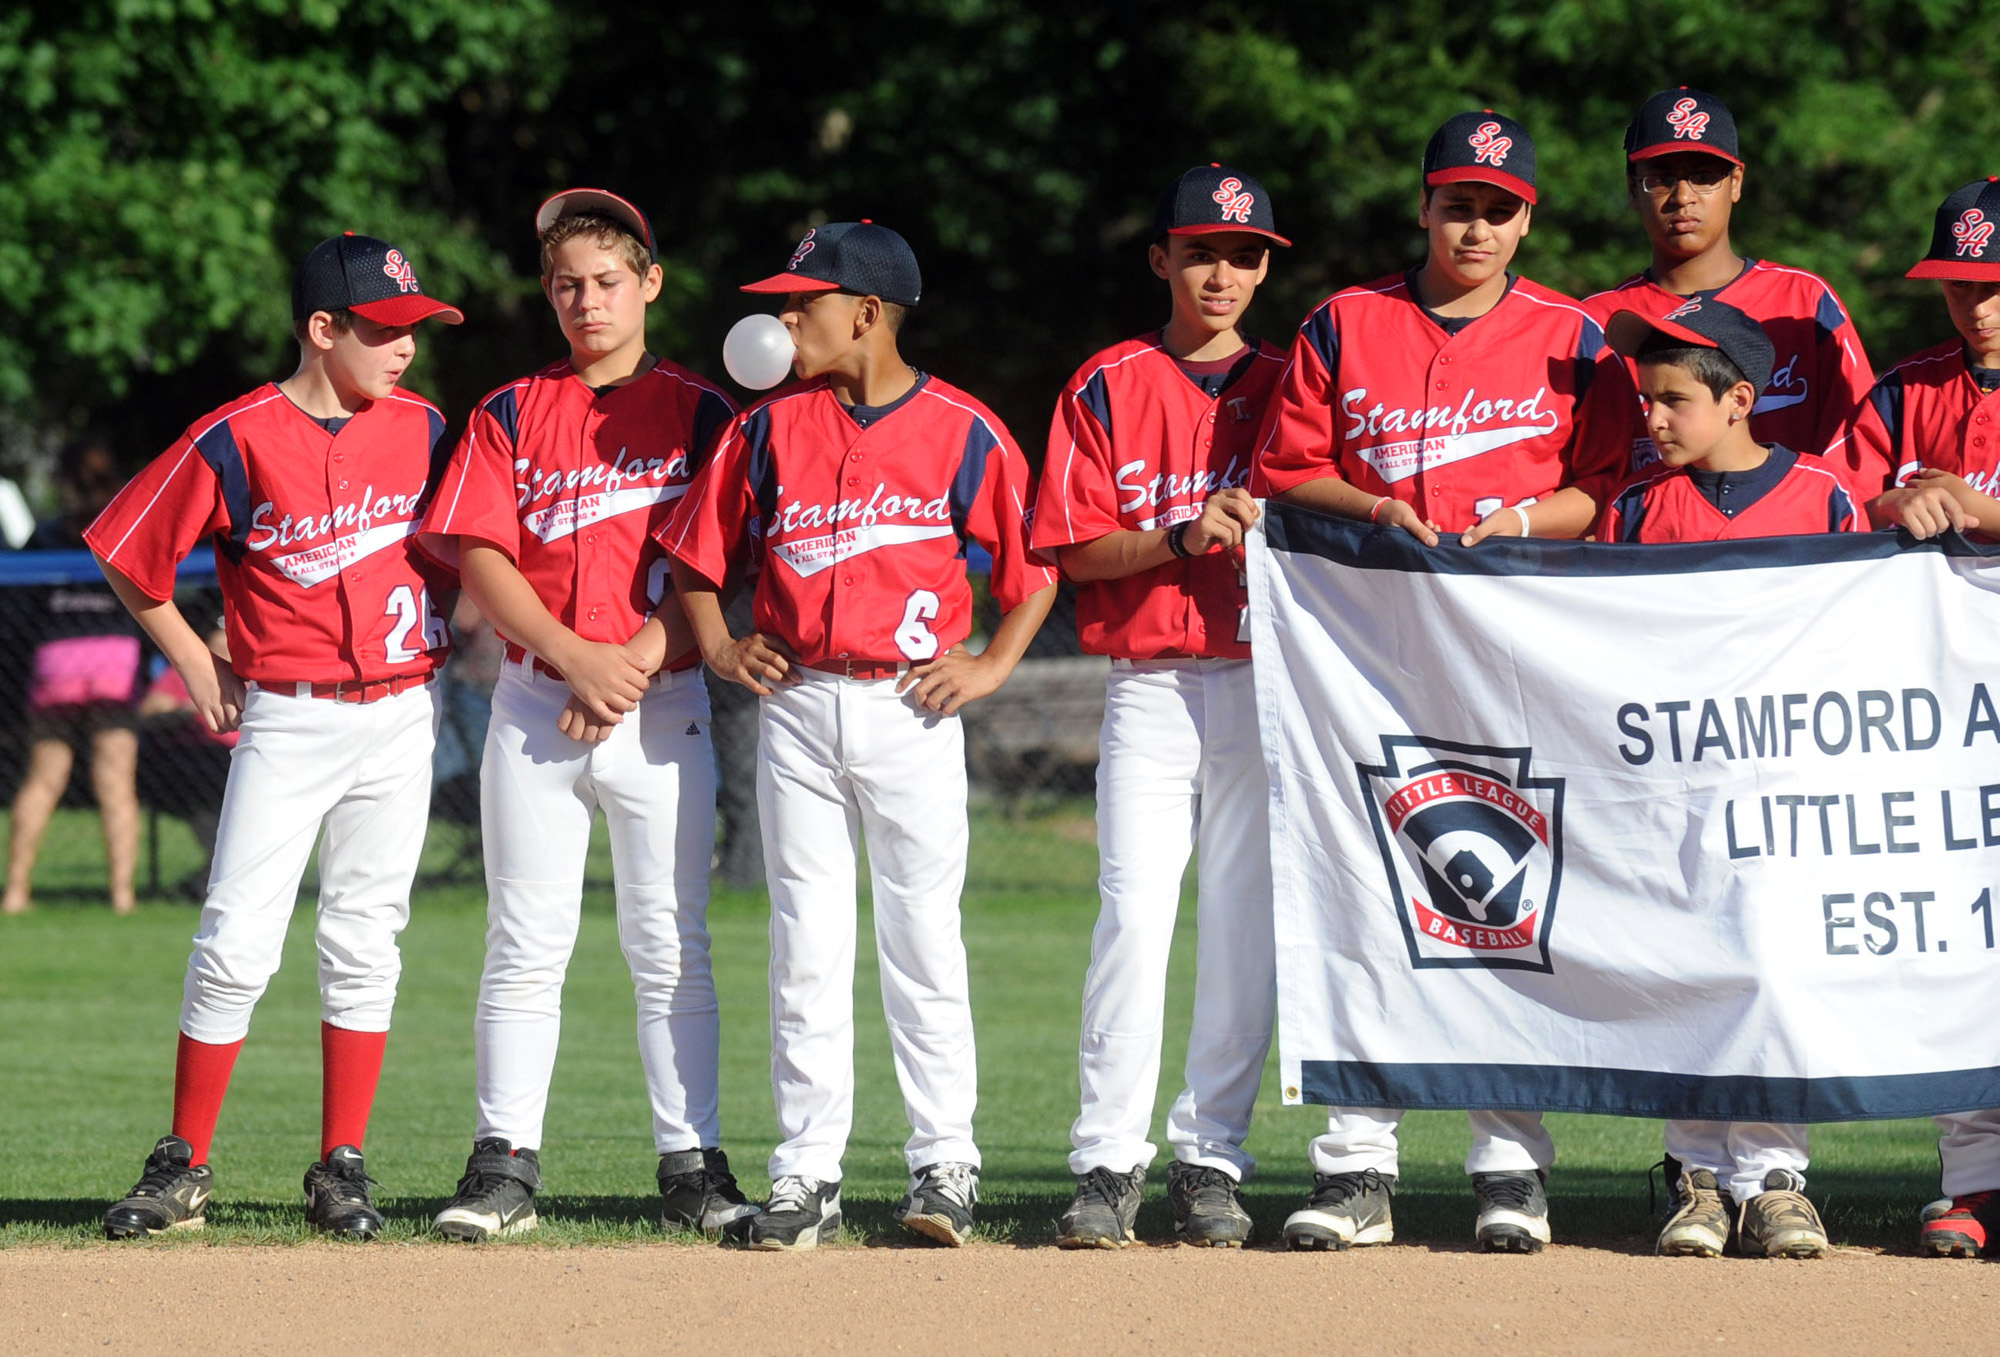 LITTLE LEAGUE: Northern rolls to 10U District 3 title